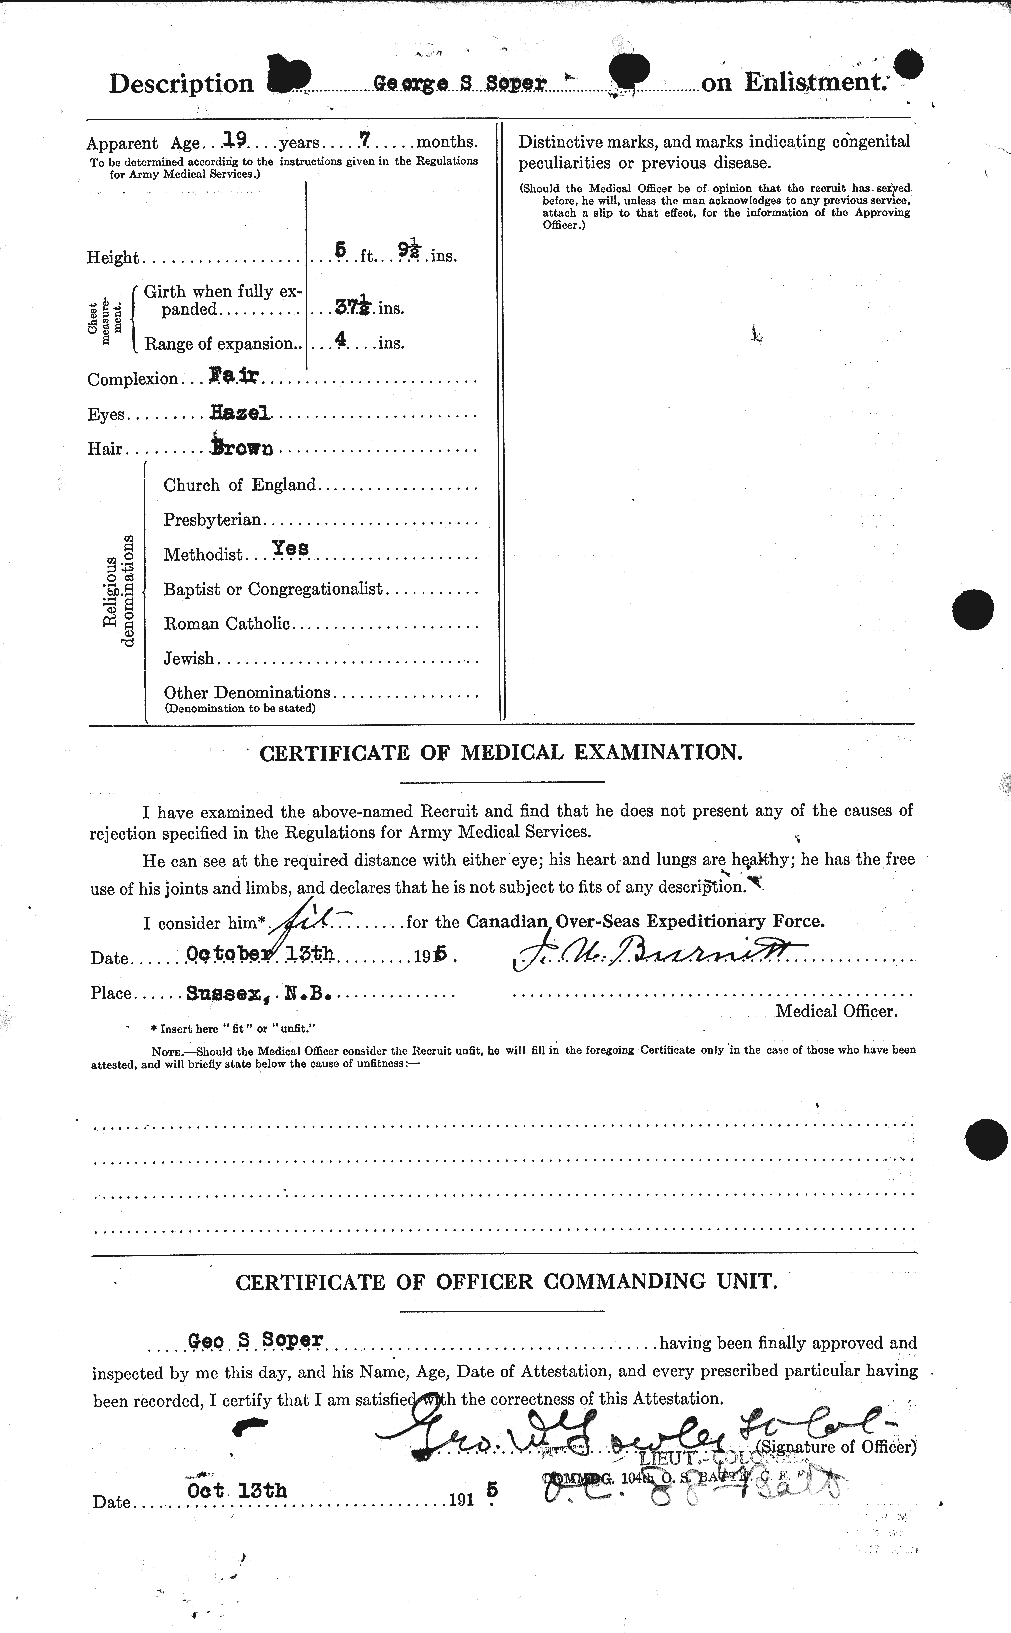 Personnel Records of the First World War - CEF 110929b